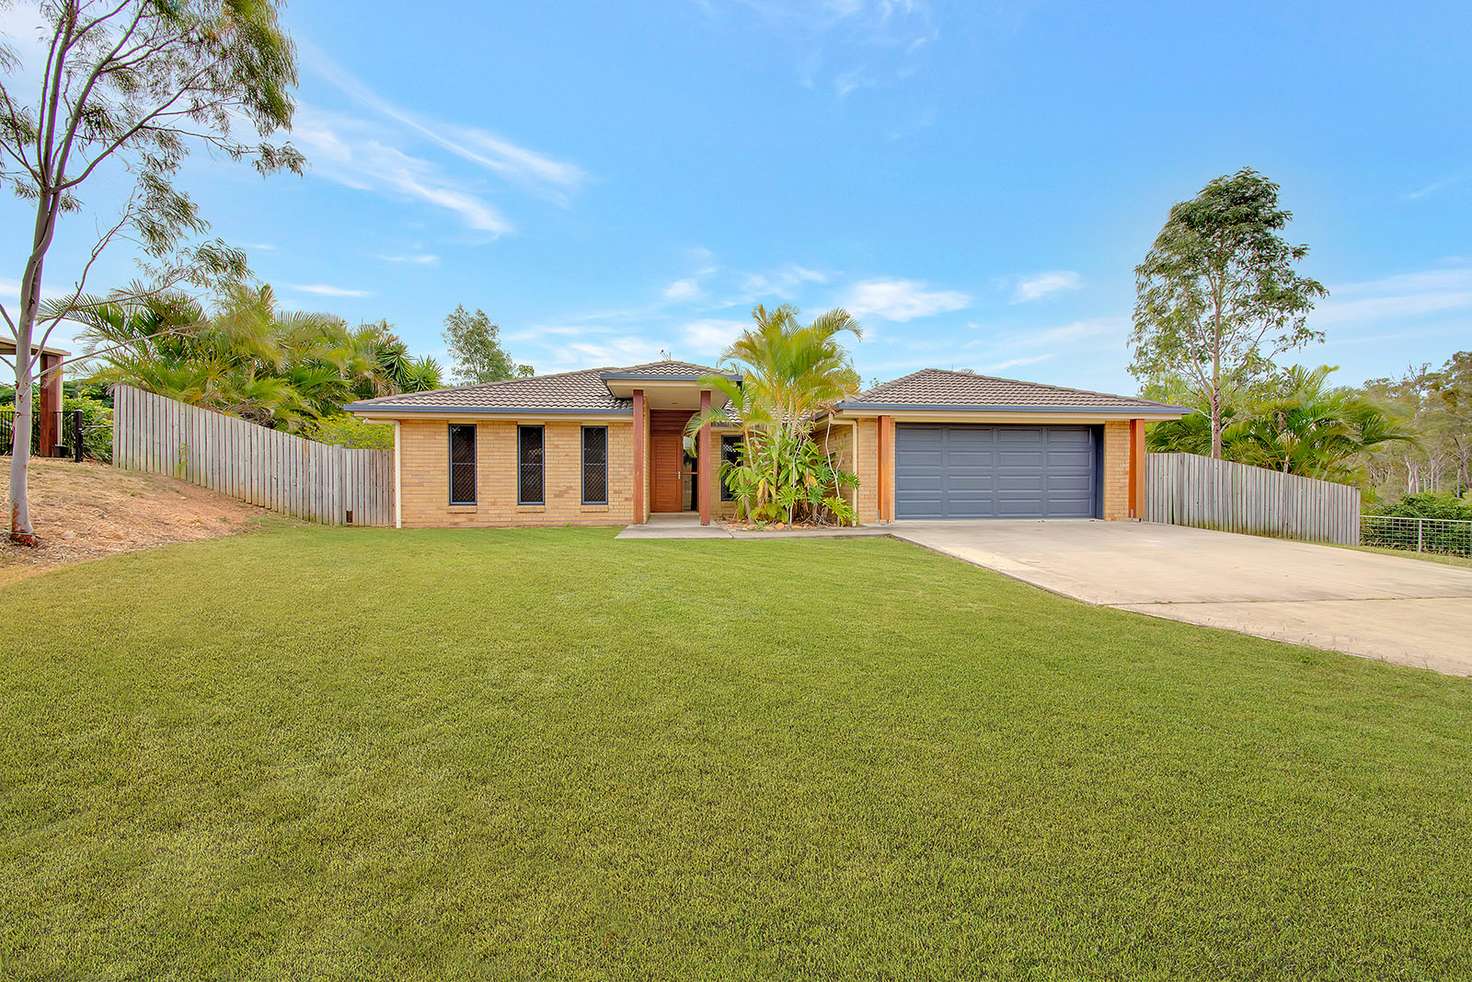 Main view of Homely house listing, 30 Baruby Bvd, Benaraby QLD 4680